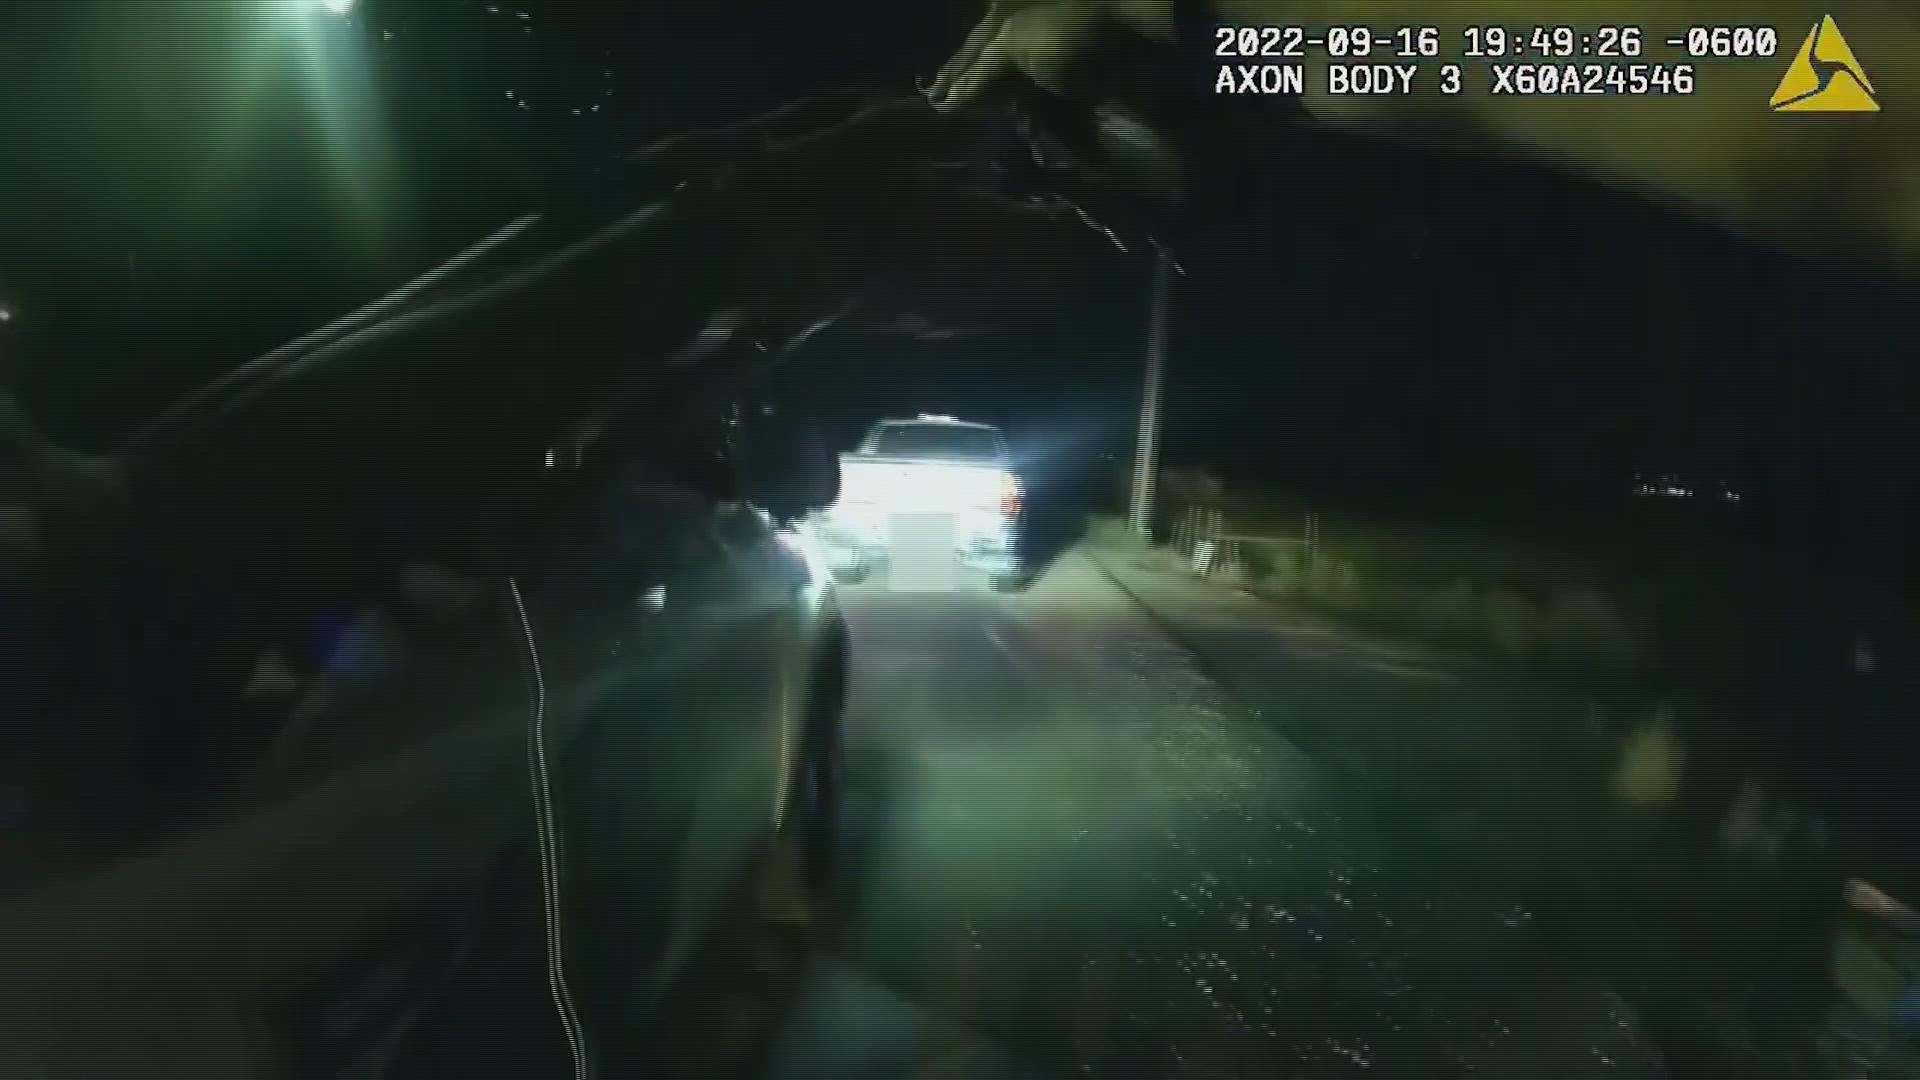 Dashcam video shows the moment a train crashed into a Platteville police cruiser on Sept. 16 when it was left on train tracks during a response.